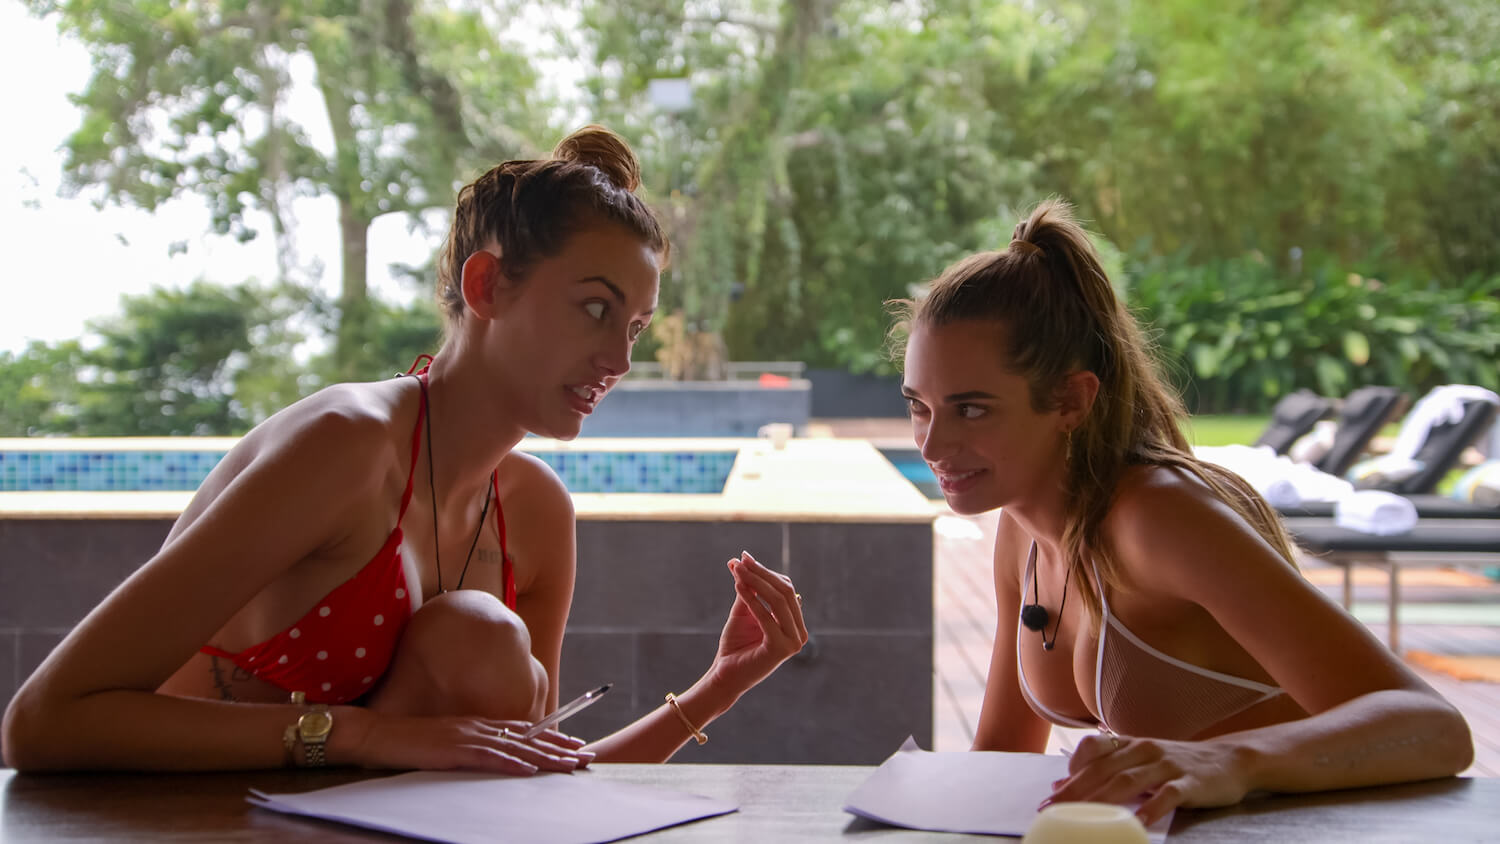 'Perfect Match' cast members Chloe Veitch and Georgia Hassarati sit at a table wearing bikinis in a production still from the series.